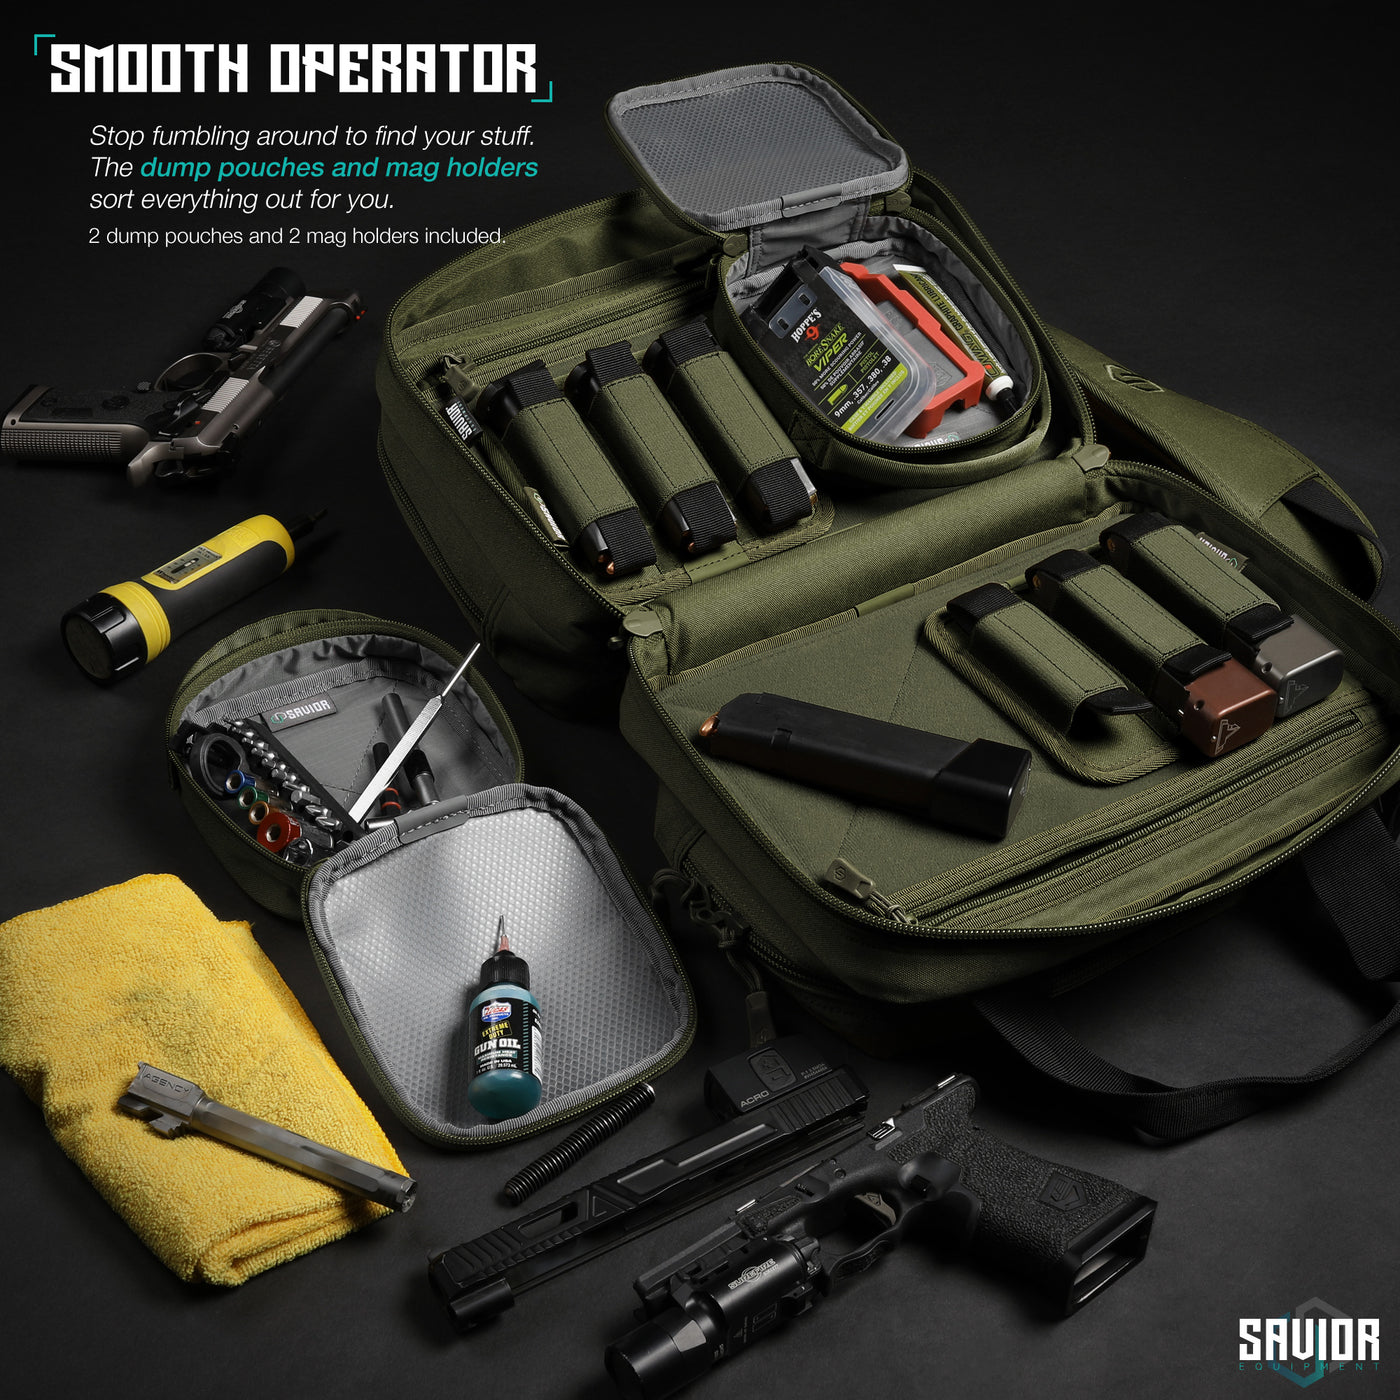 Smooth Operator - Stop fumbling around to find your stuff. The dump pouches and mag holders sort everything out for you. 2 dump pouches and 2 mag holders included.